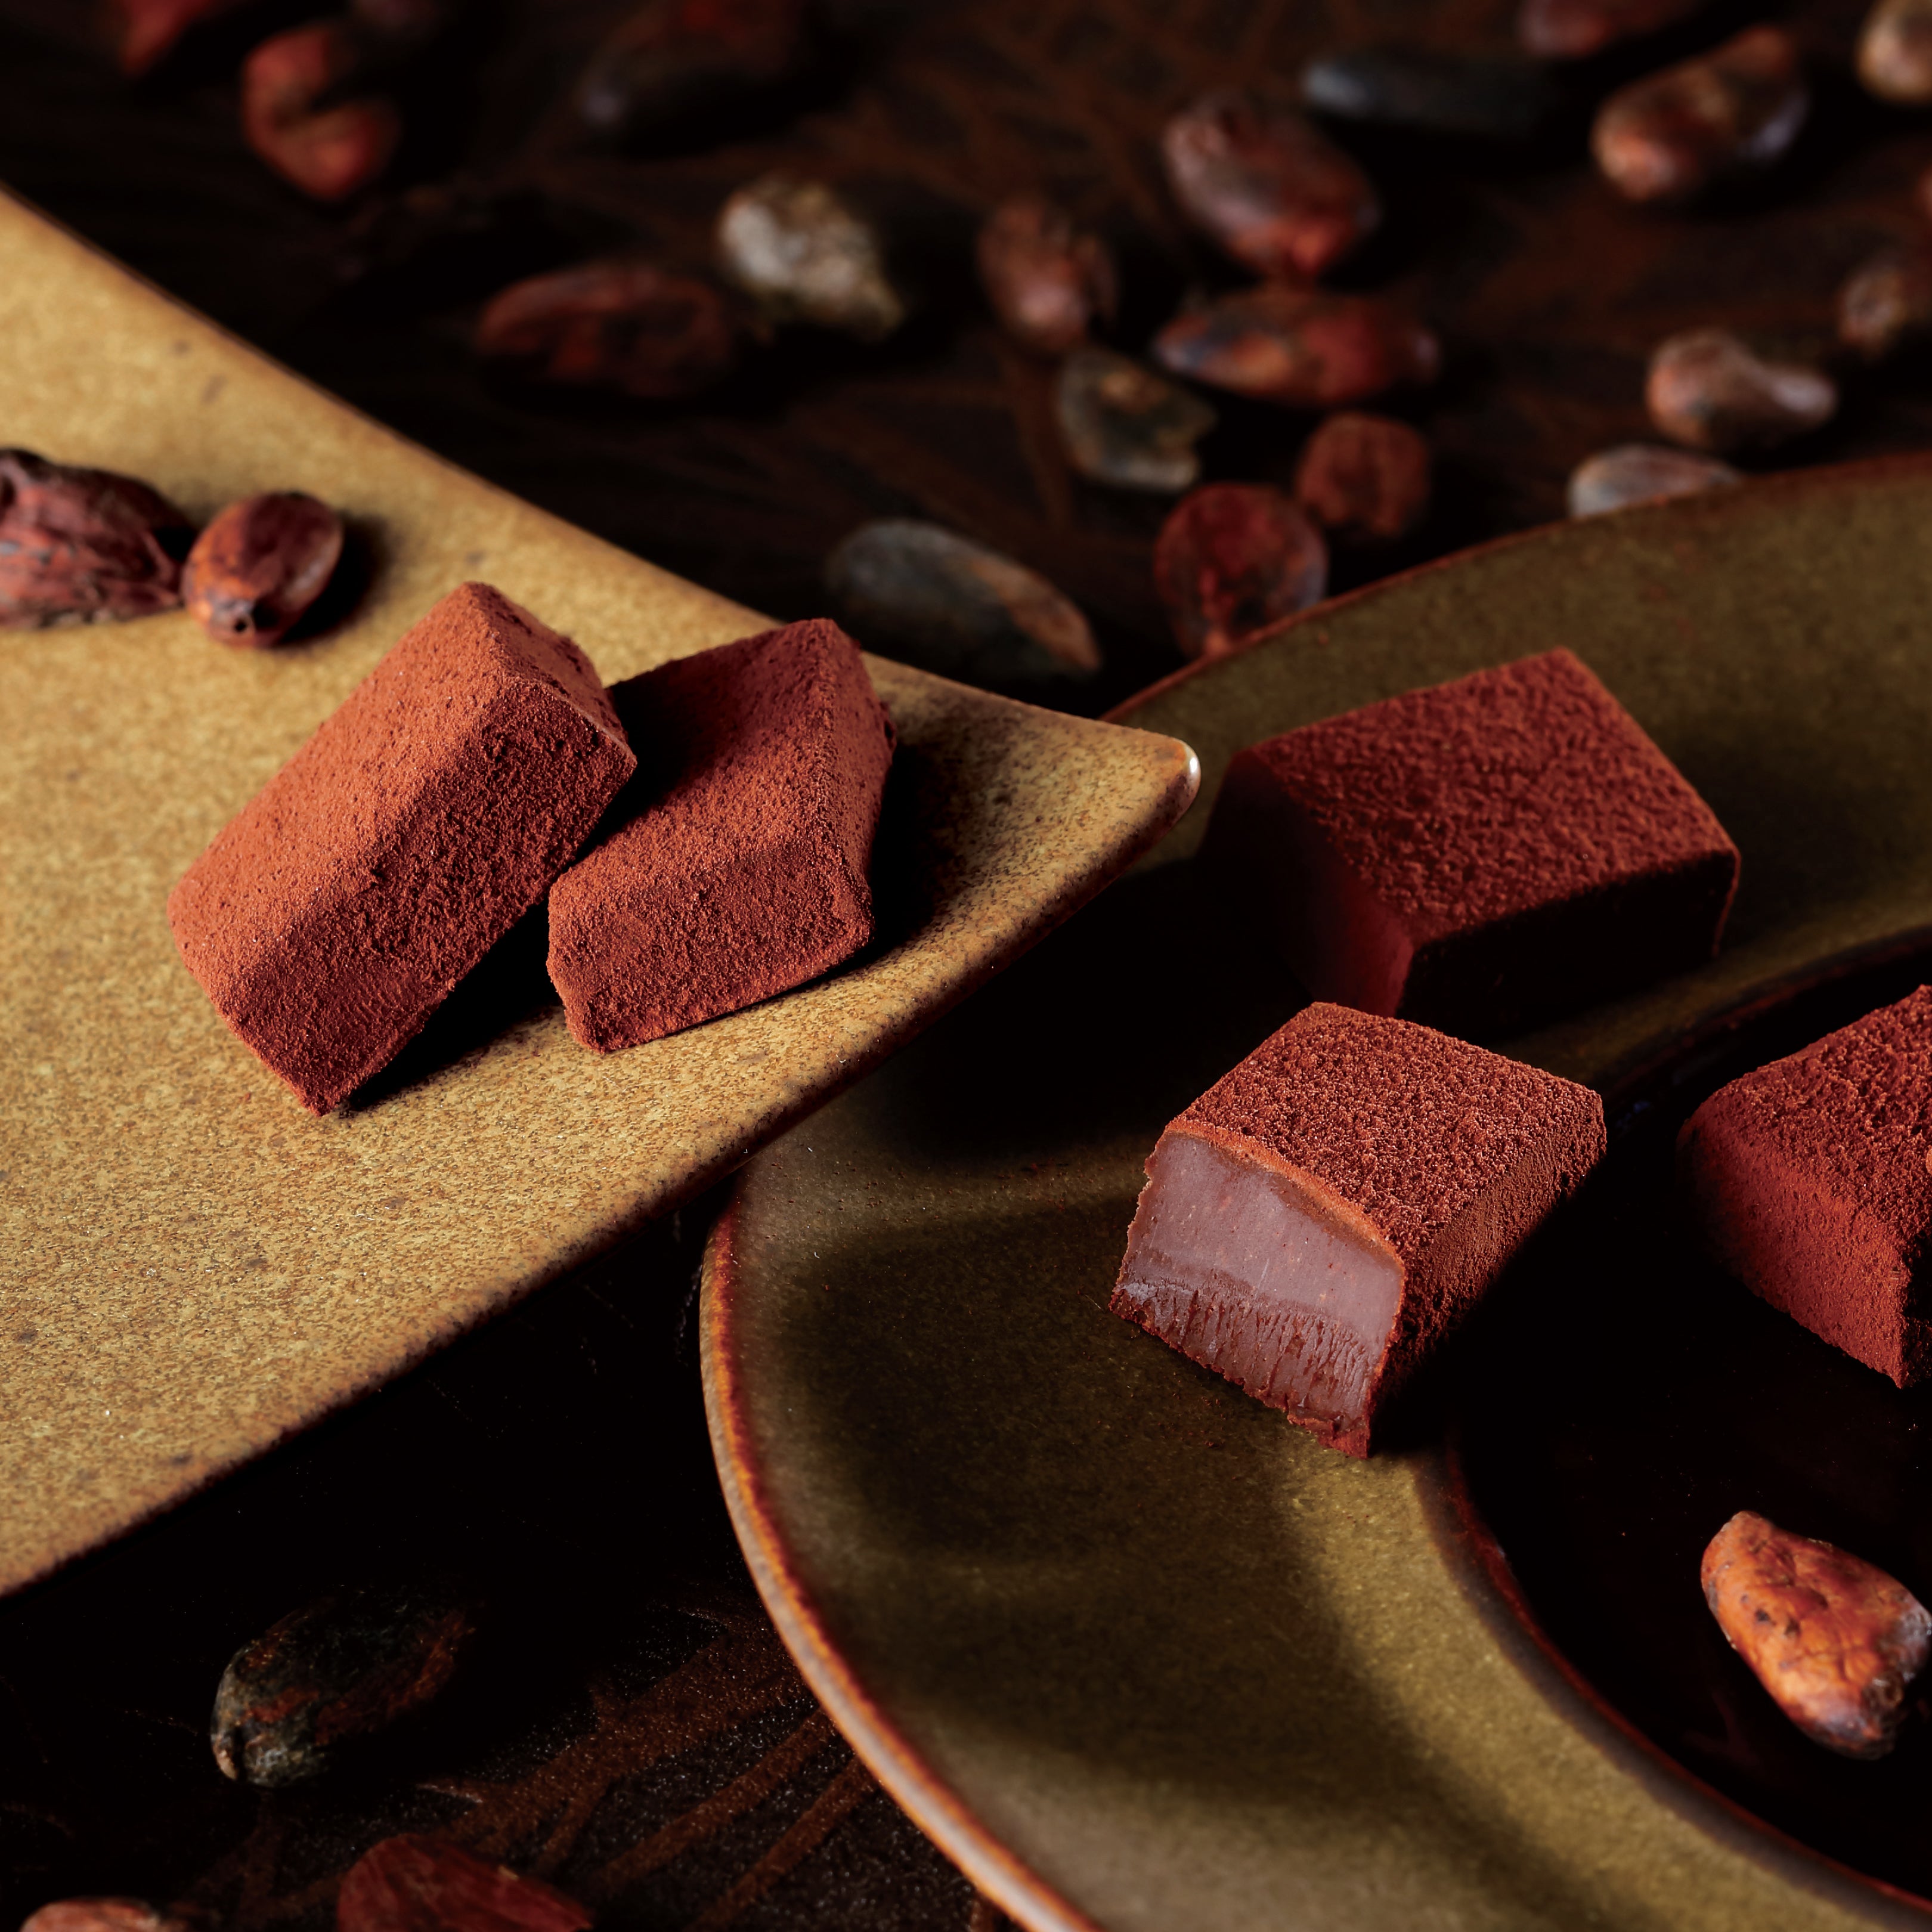 Image shows ROYCE' Nama Chocolate blocks on plates with cacao beans.